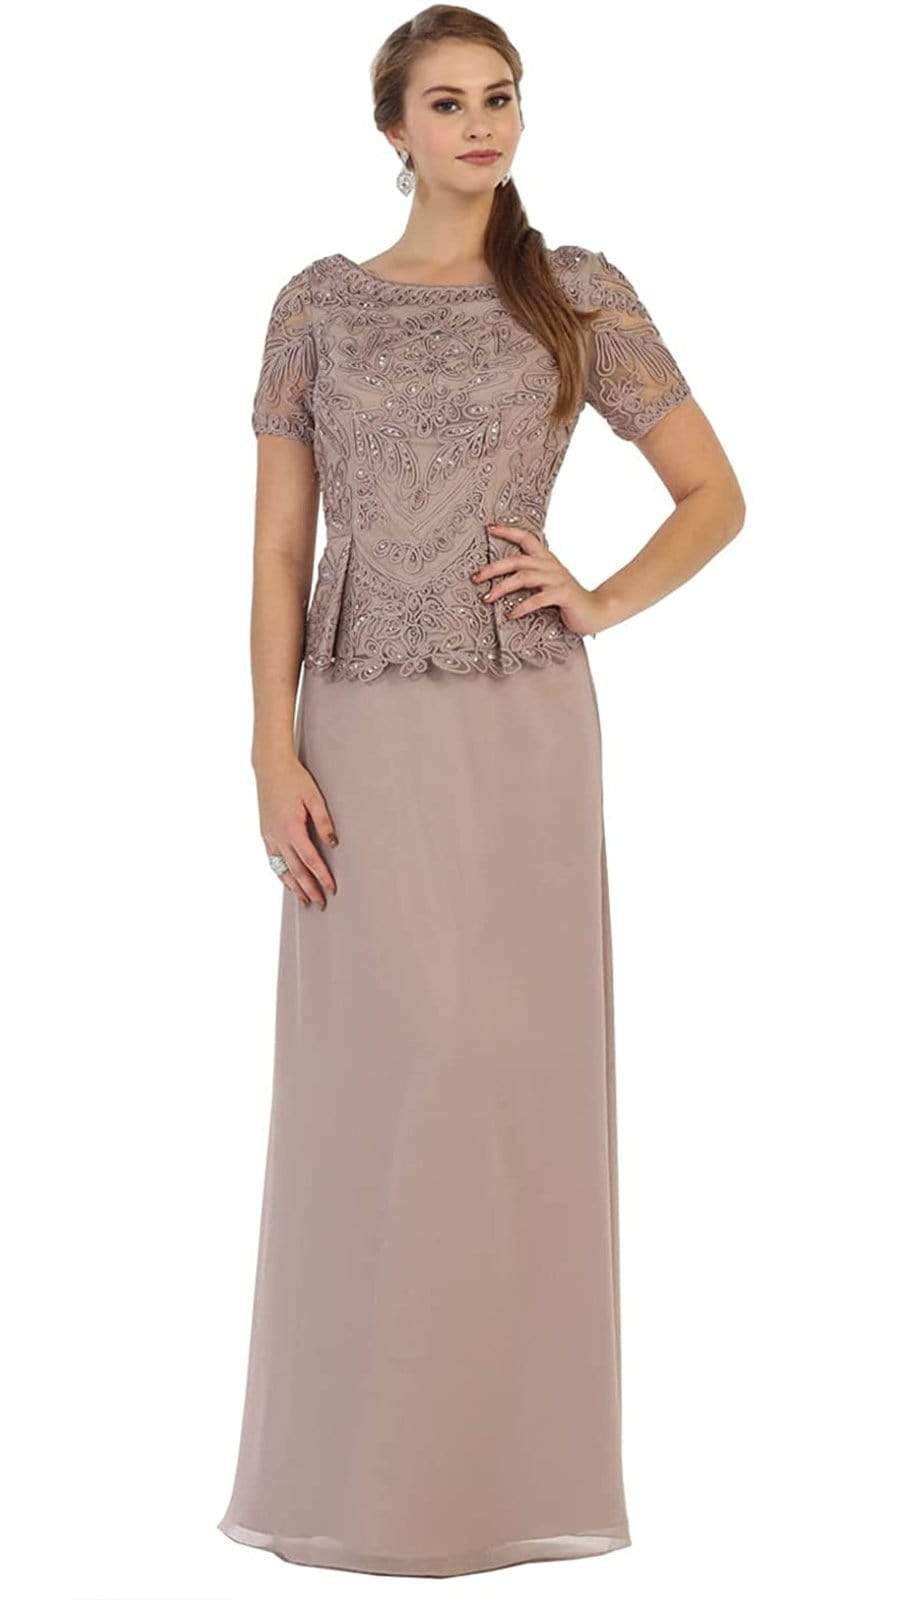 May Queen - MQ-1427 Short Sleeve Embroidered Bateau Neck A-line Evening Dress Special Occasion Dress M / Mocha